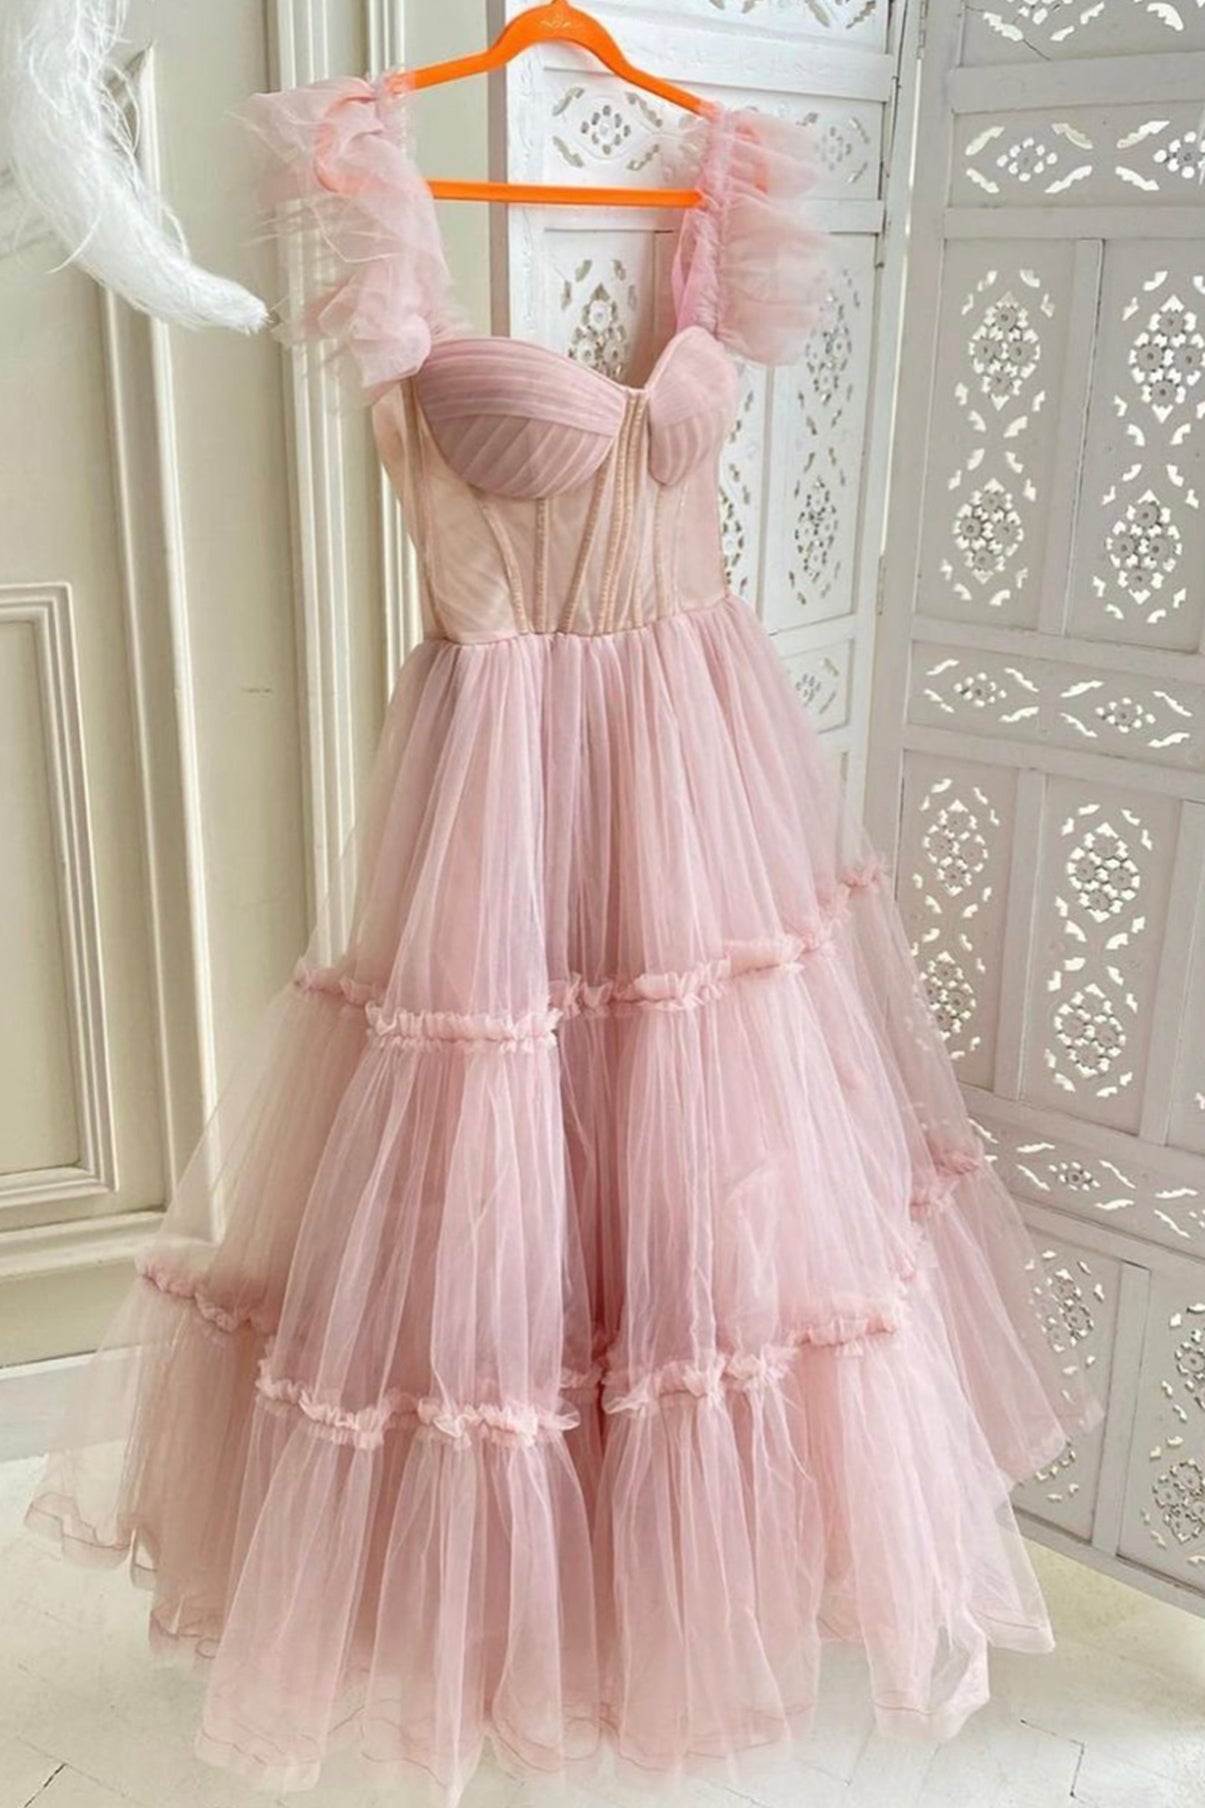 Pink Tulle Short Corset Prom Dresses, A-Line Party Corset Homecoming Dresses outfit, Bridesmaid Dresses Blush Pink